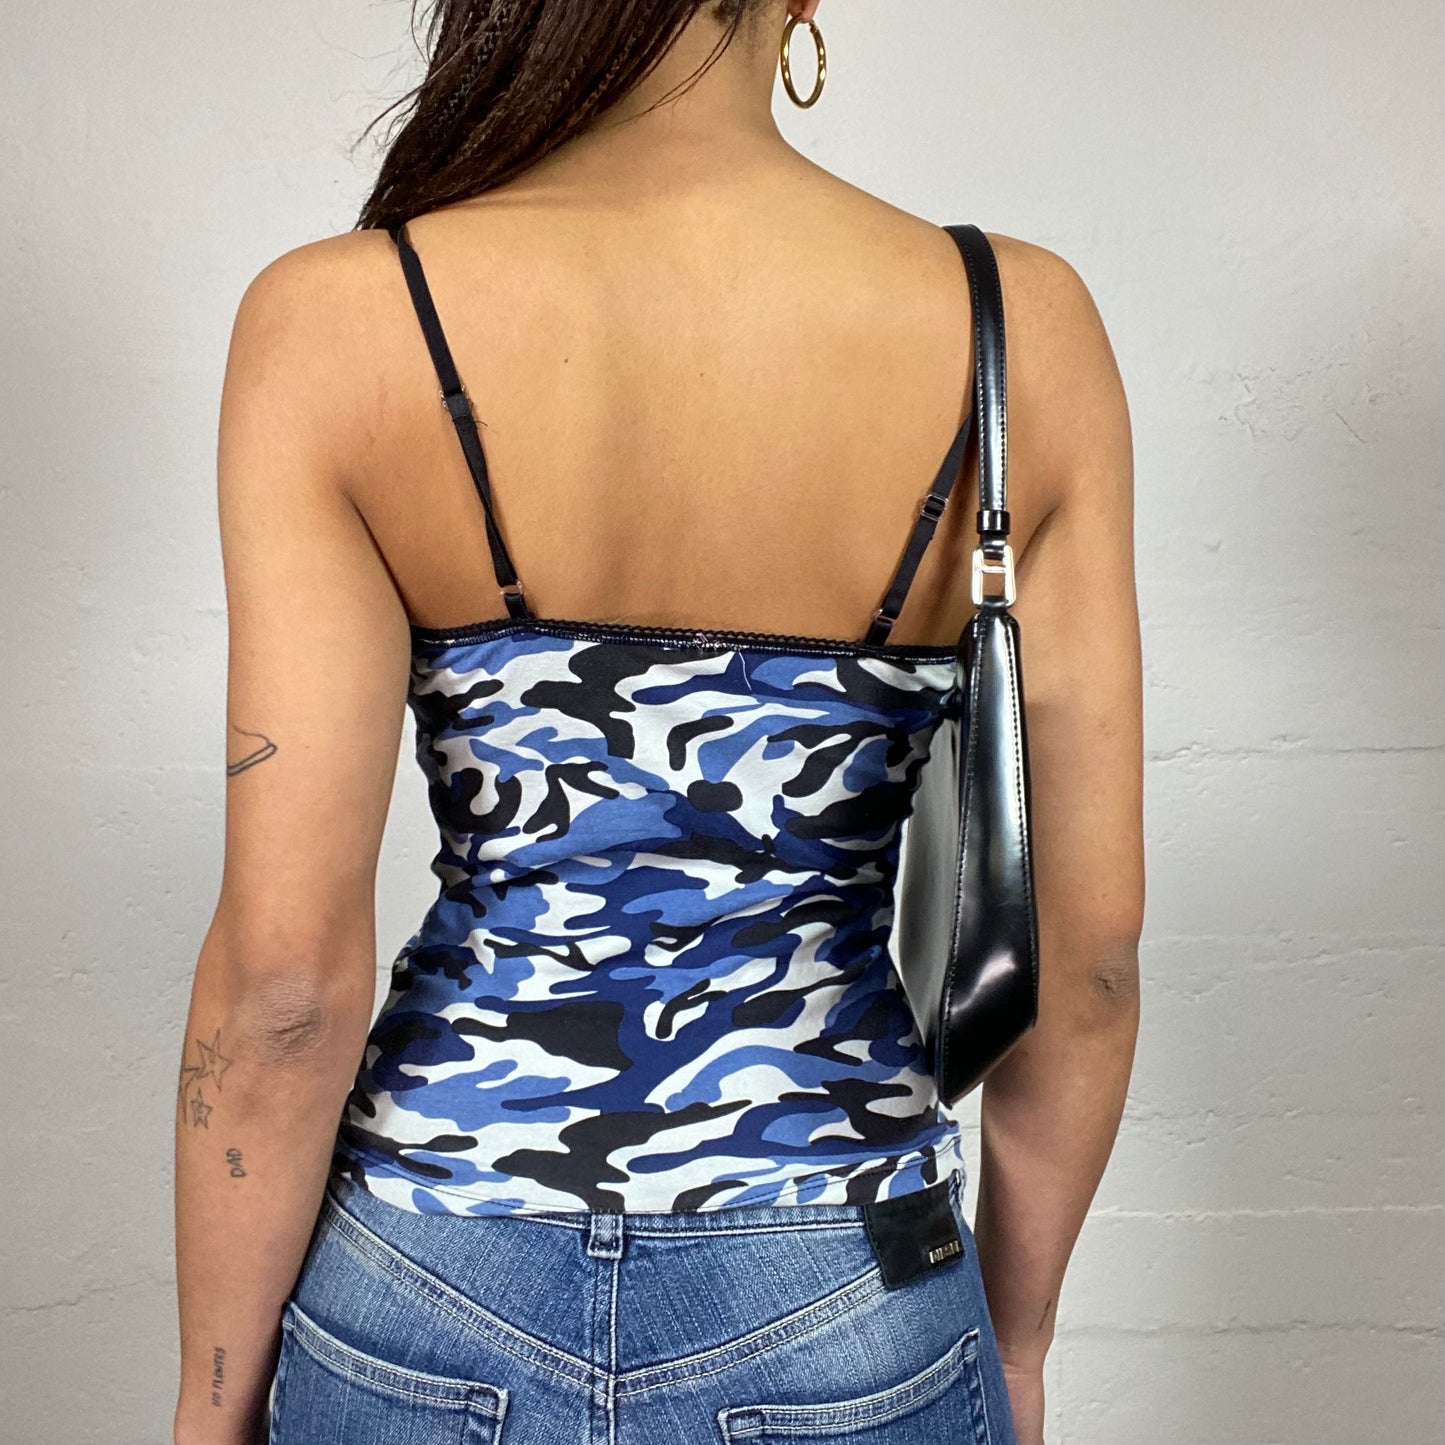 Vintage 2000's Archive Blue Top with Camo Print (S)